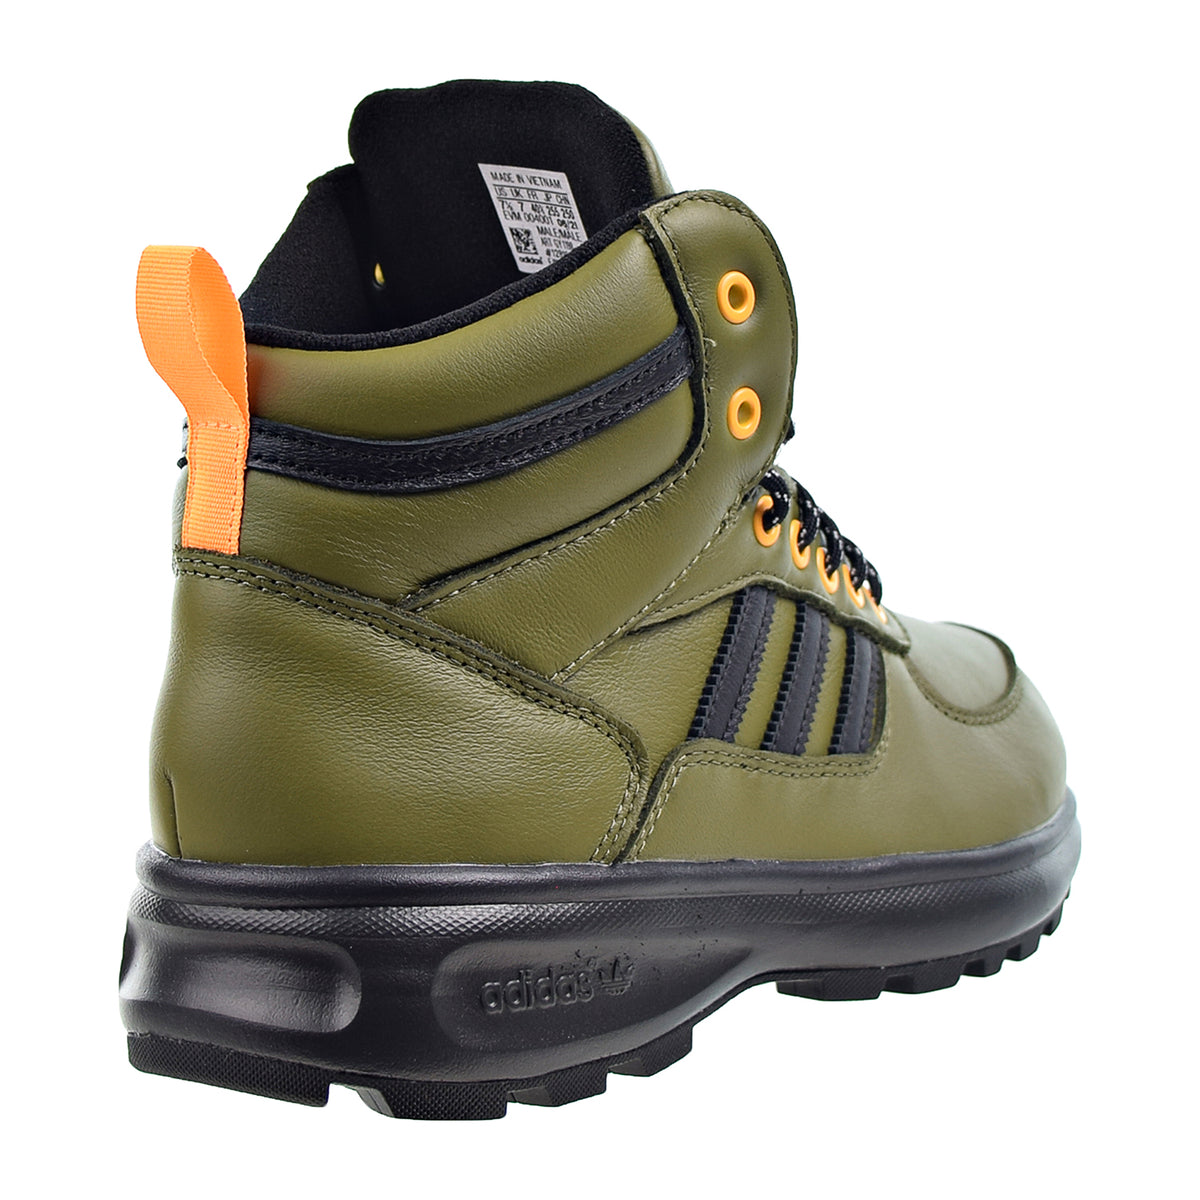 Adidas Boots Olive-Black-Gold